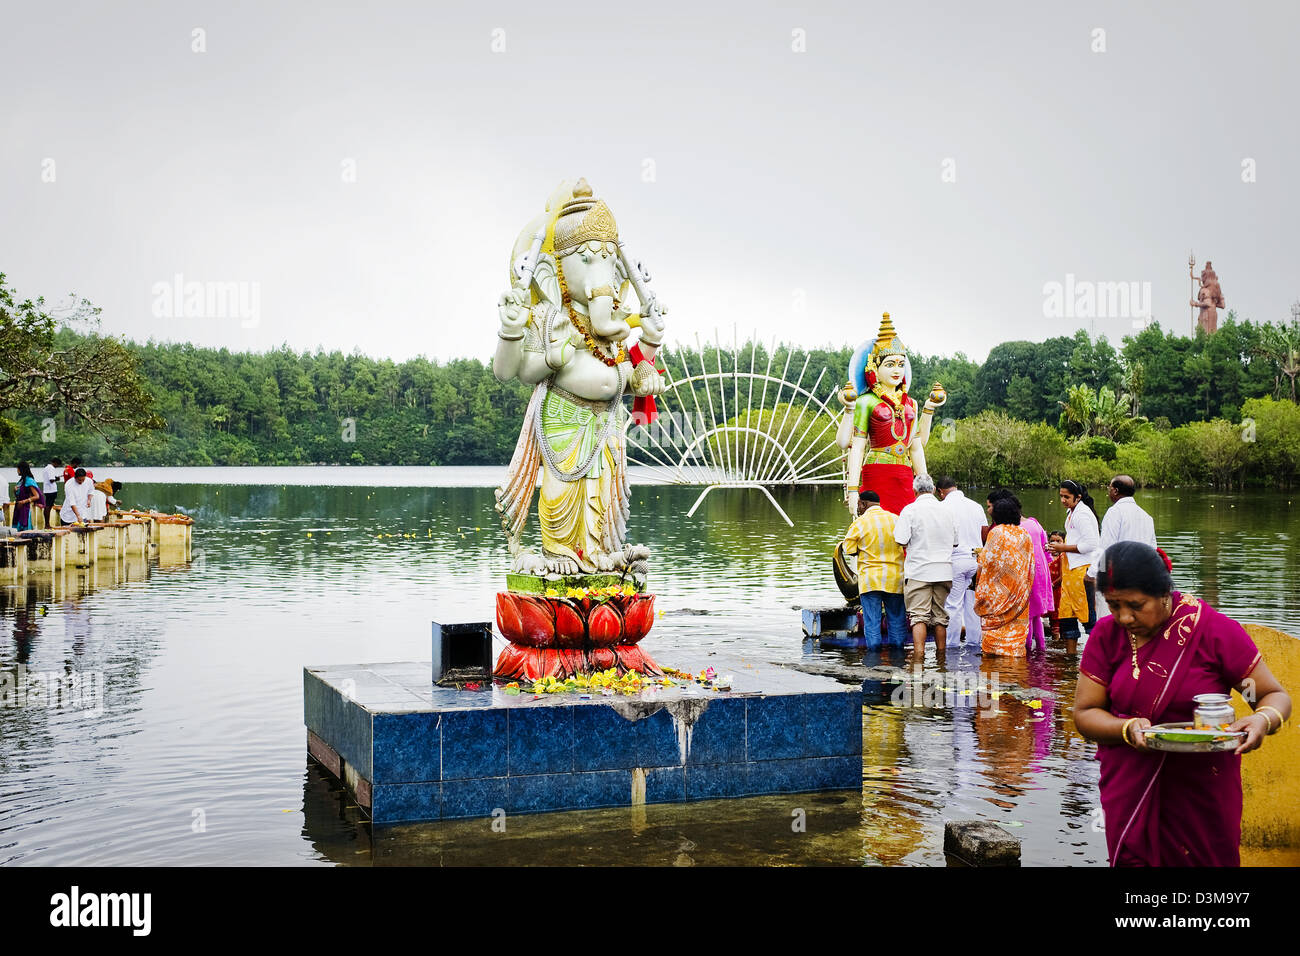 Hindus make offerings to Hindu Gods at Grand Bassin at Ganga Talao lake, Mauritius - considered holiest place in Mauritius Stock Photo